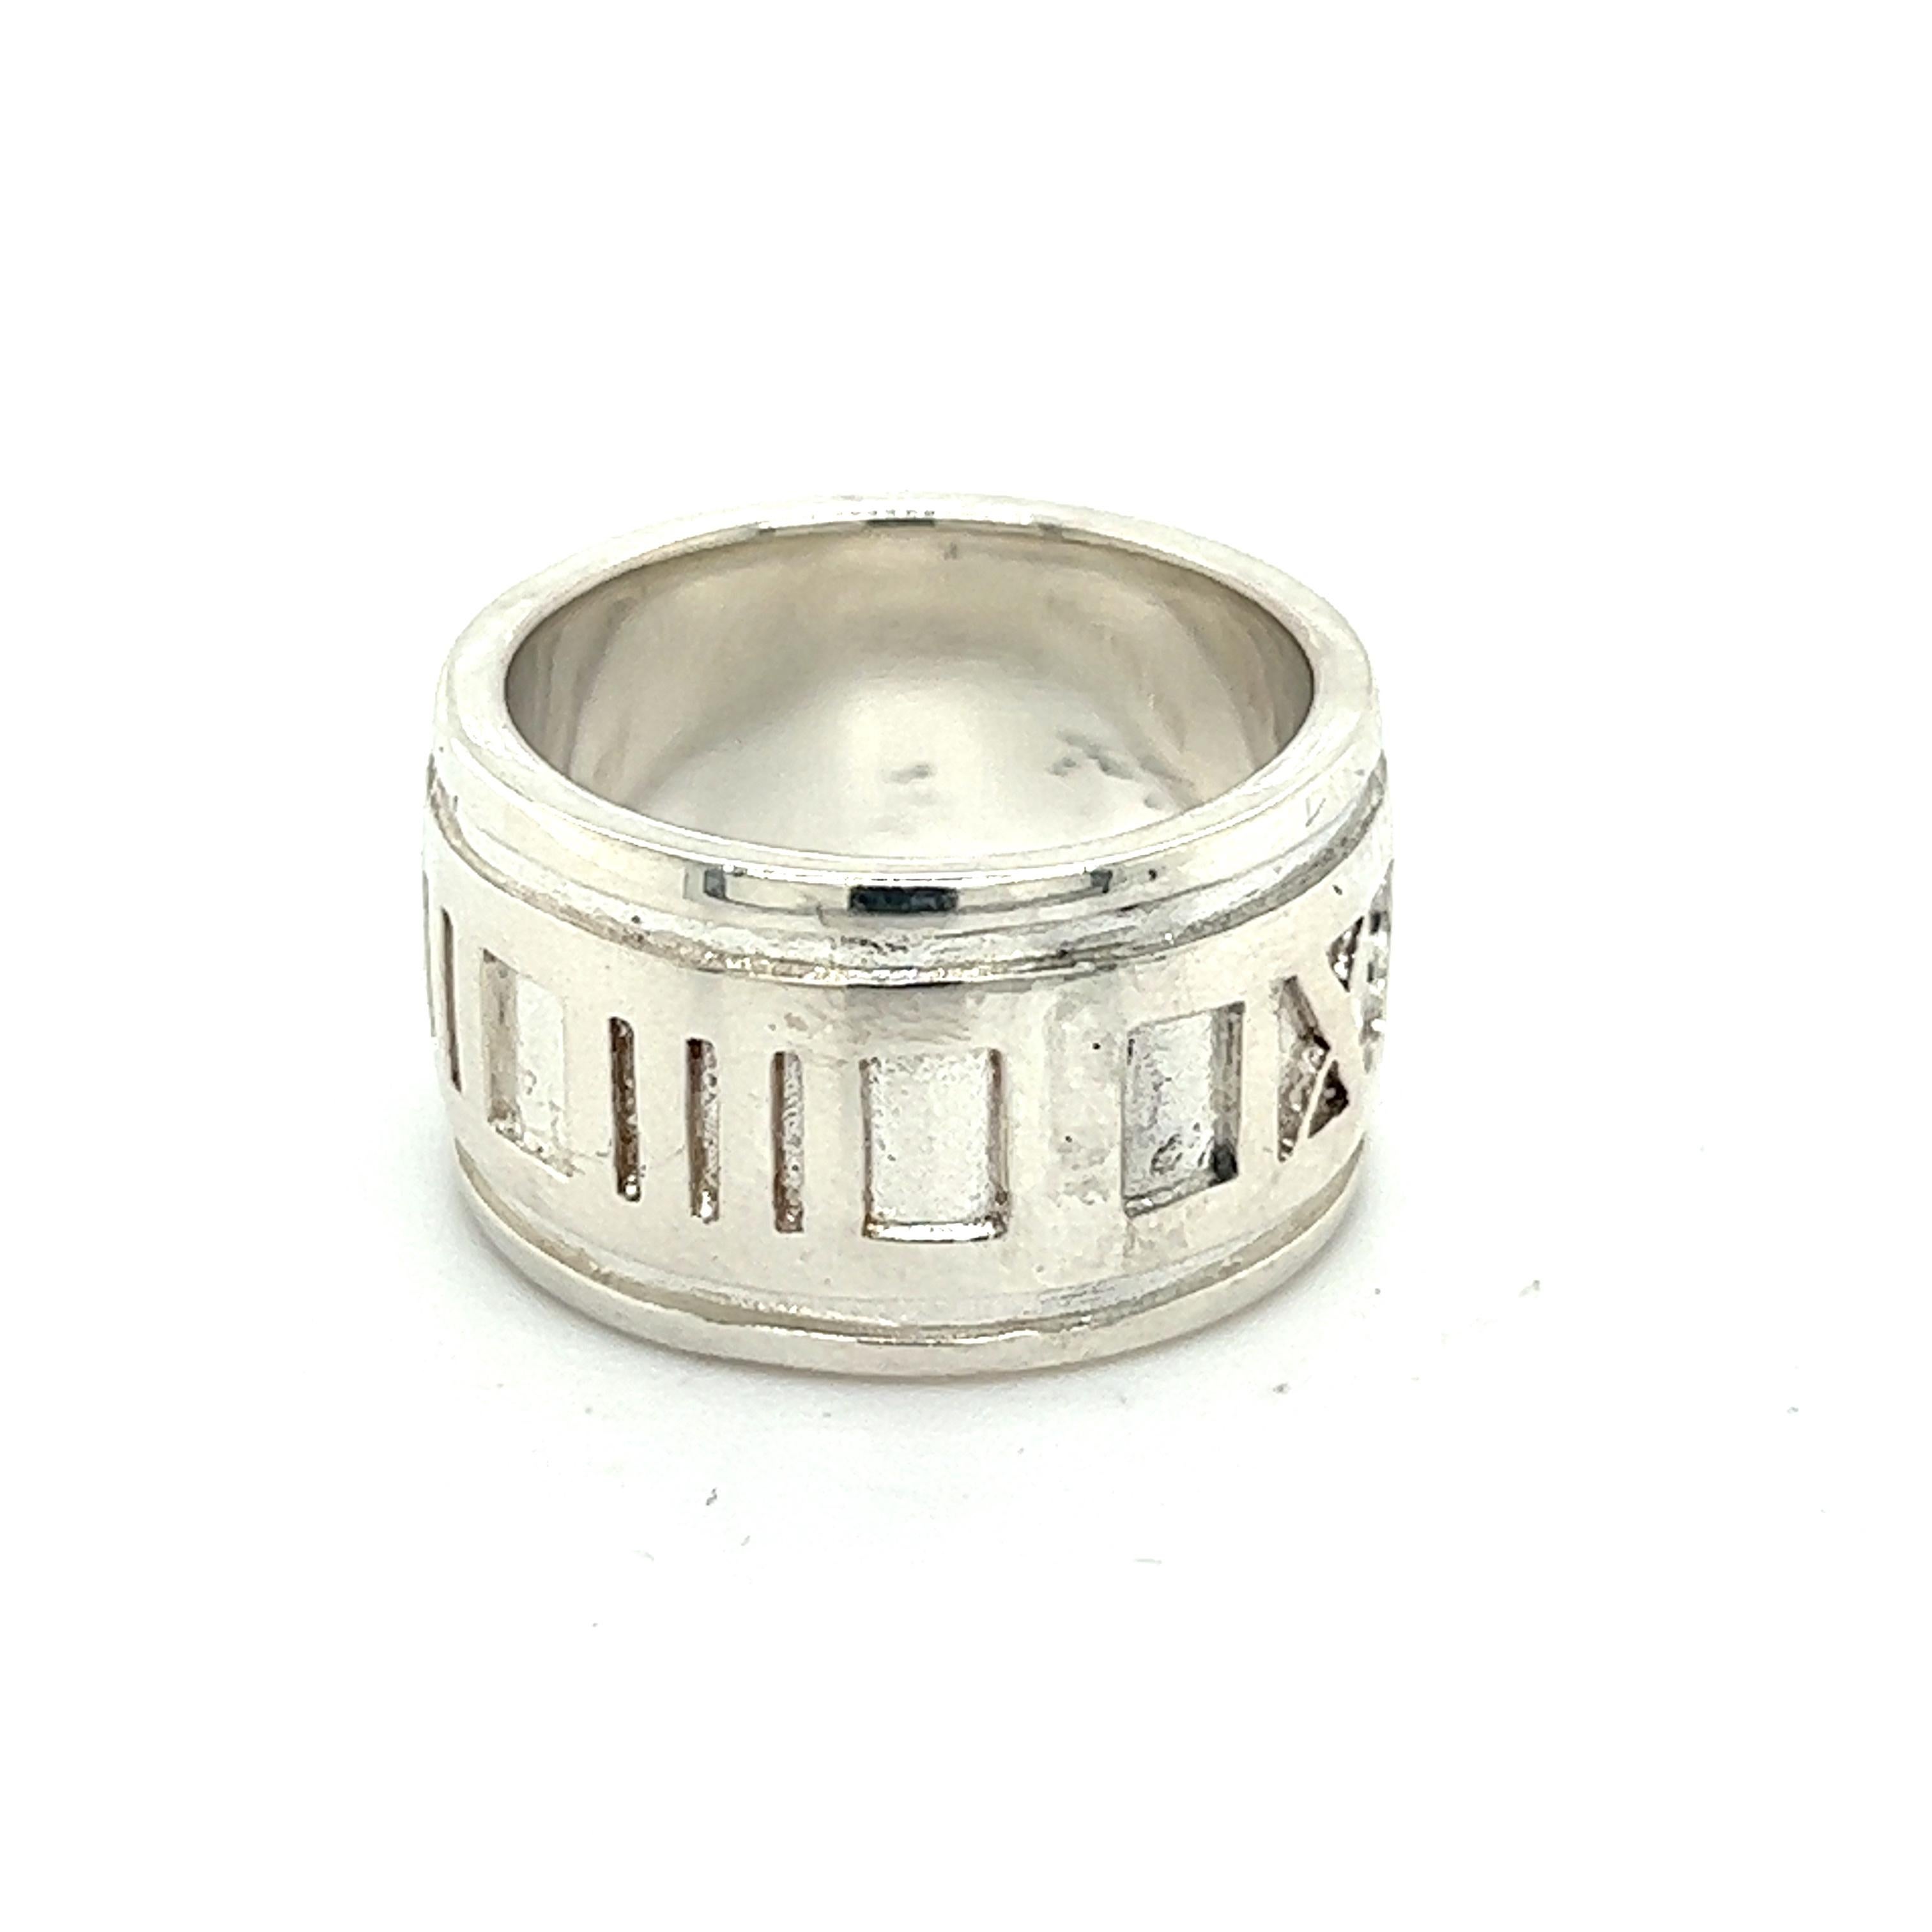 Authentic Tiffany & Co Estate Atlas Ring Size 5 Silver 11 mm TIF382

TRUSTED SELLER SINCE 2002

DETAILS
Ring Size: 5
Height: 11 mm
Weight: 9.6 Grams
Metal: Sterling Silver

We try to present our estate items as best as possible and most have been